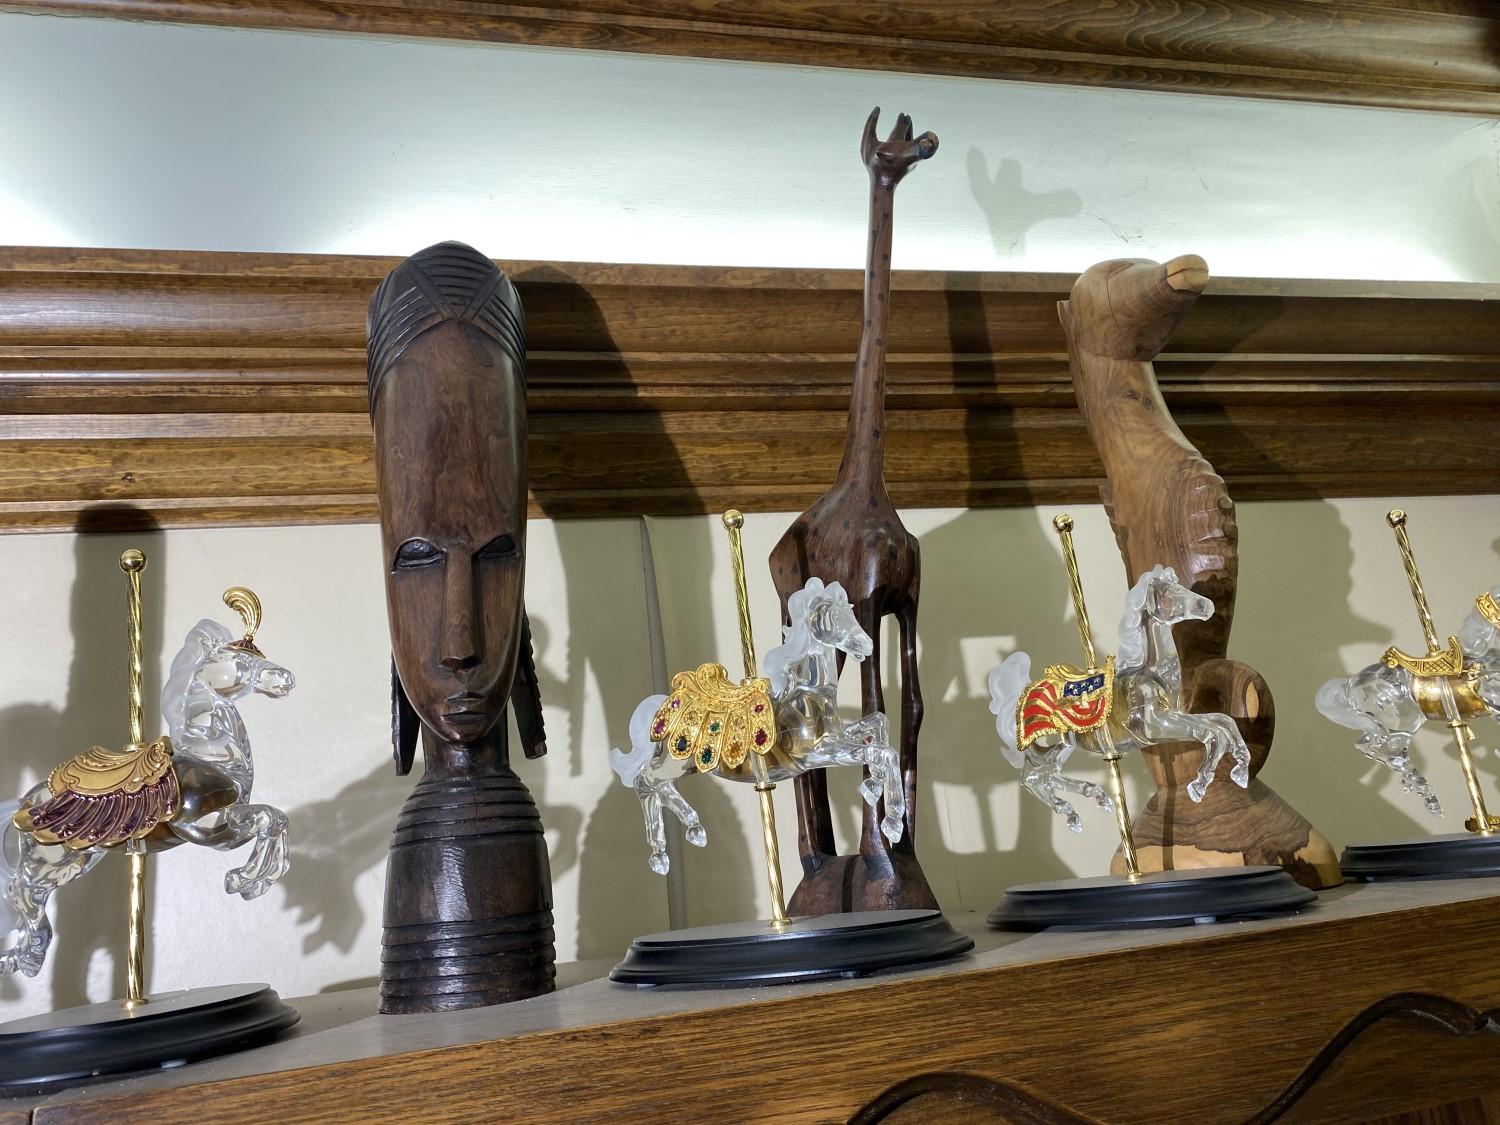 Carved tribal items on top shelf